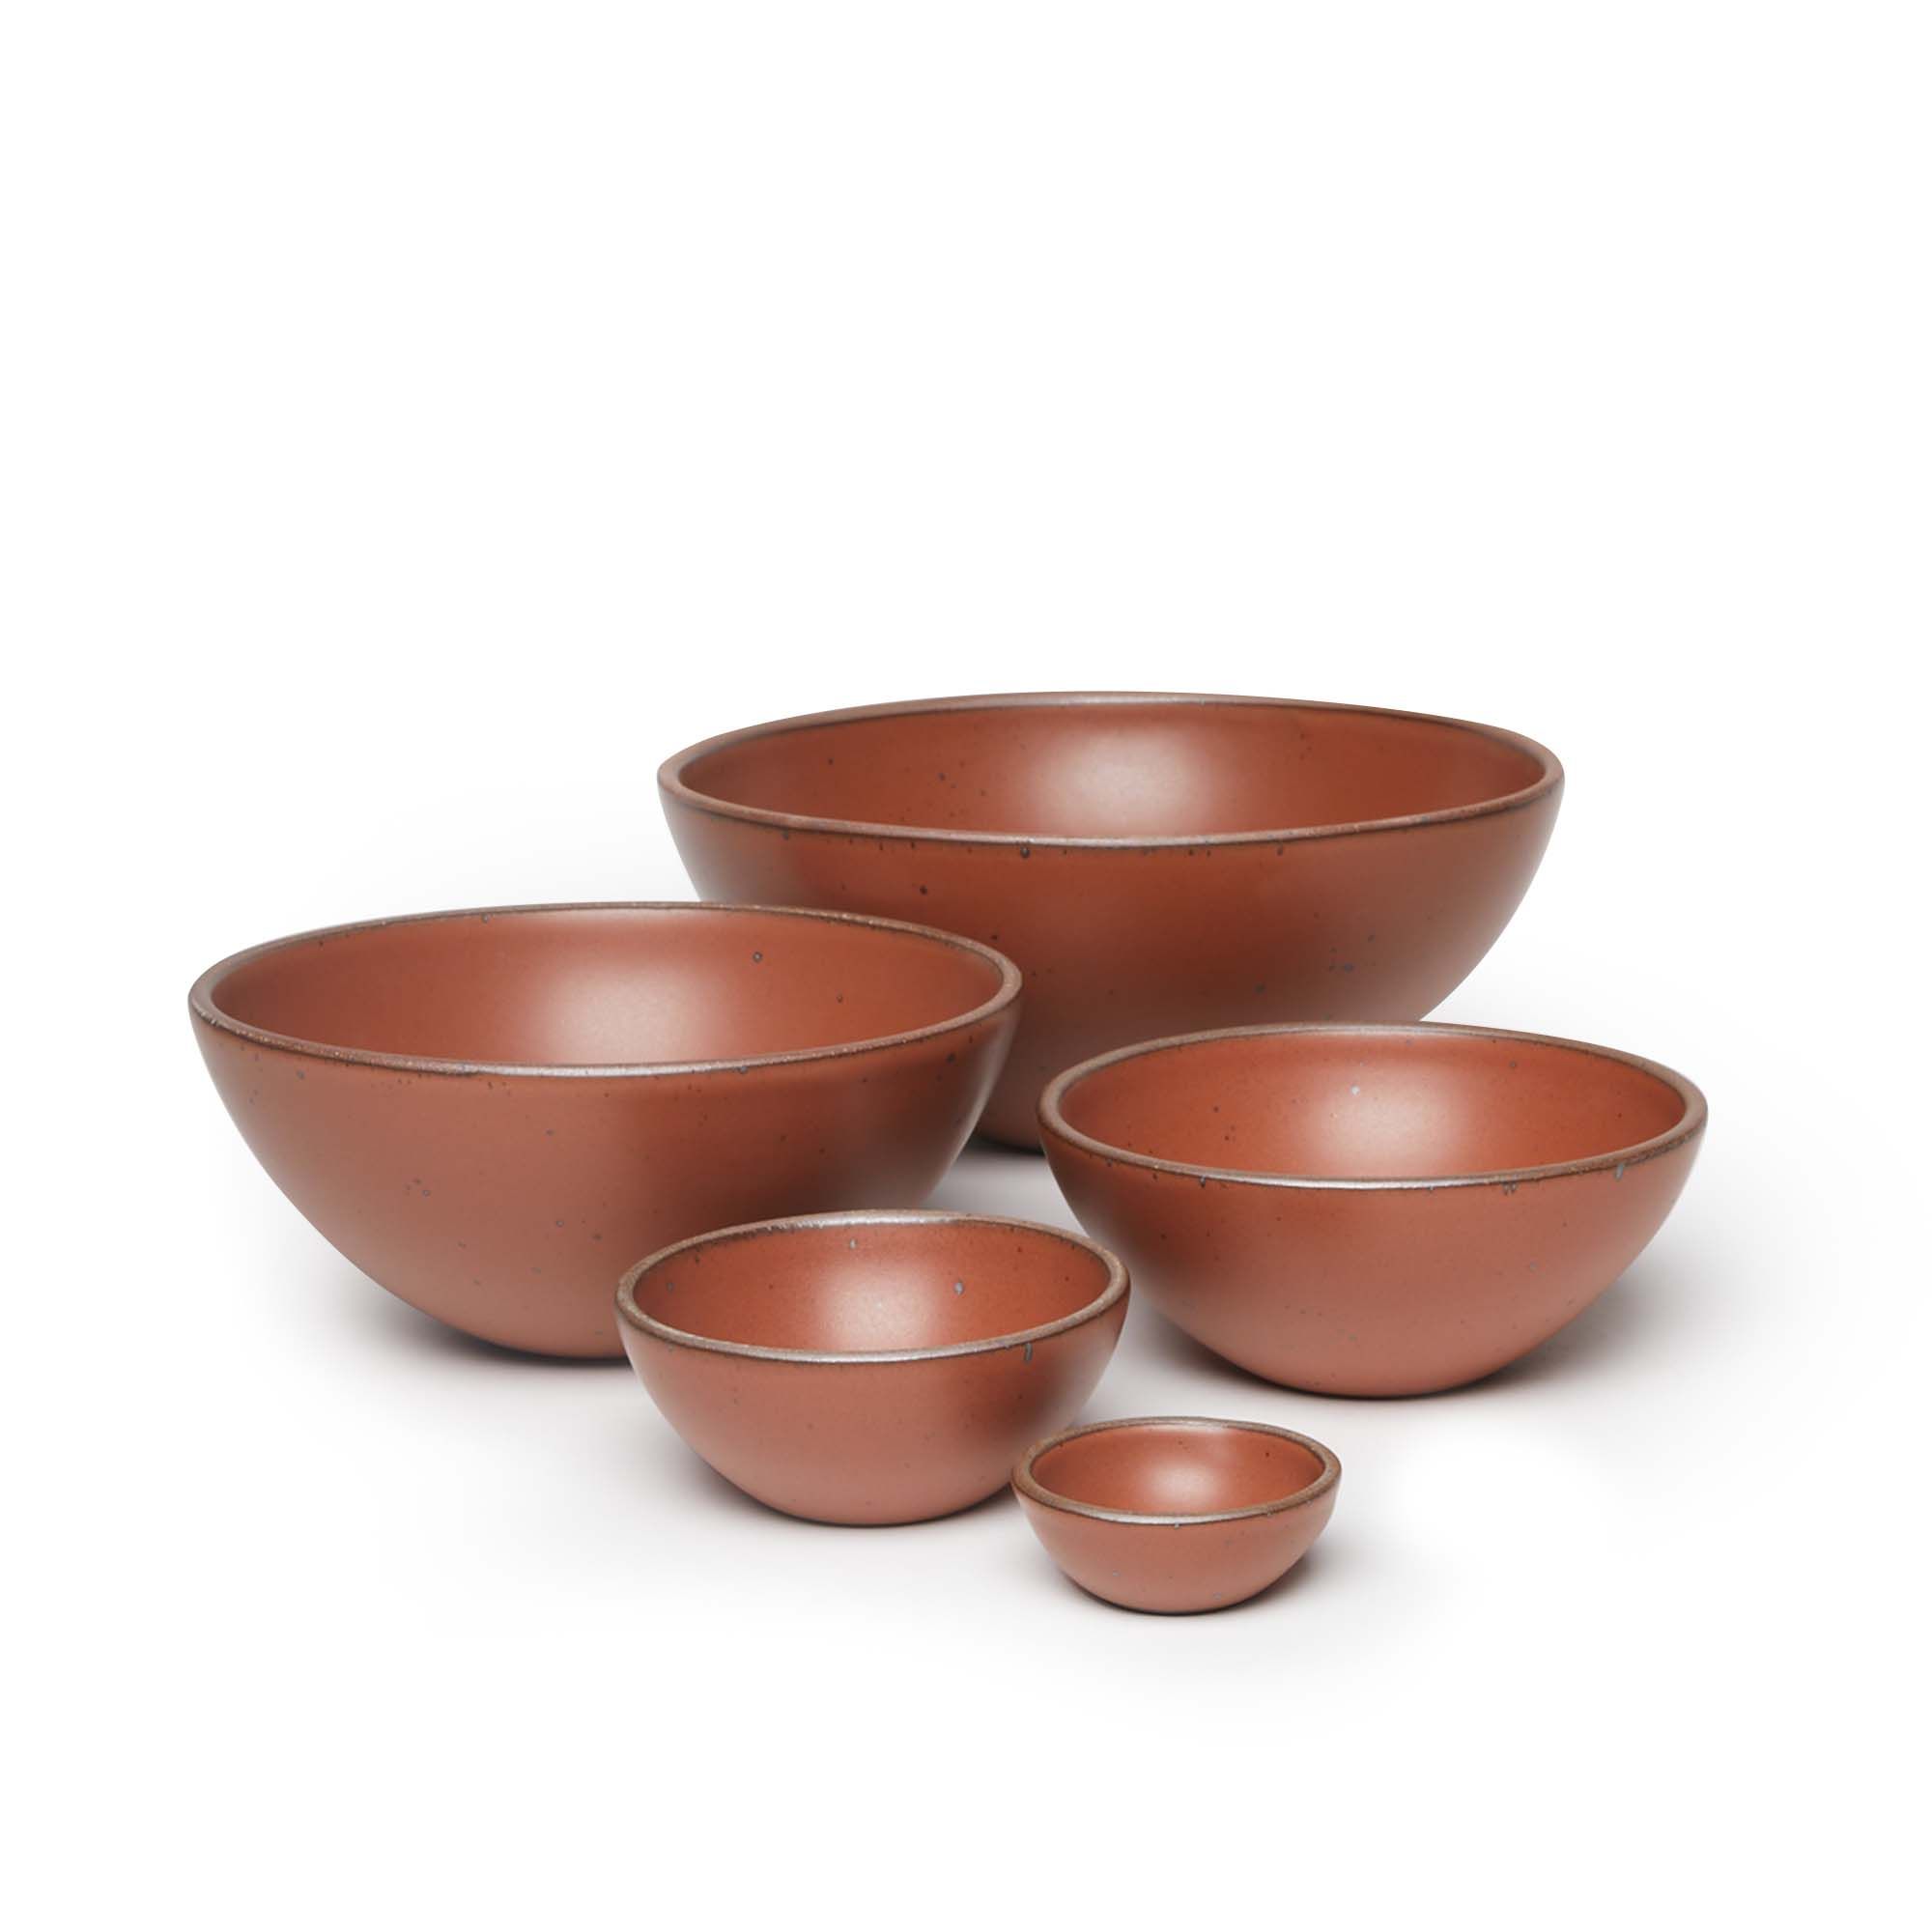 A bitty bowl, ice cream bowl, soup bowl, popcorn bowl, and mixing bowl paired together in a cool burnt terracotta color featuring iron speckles